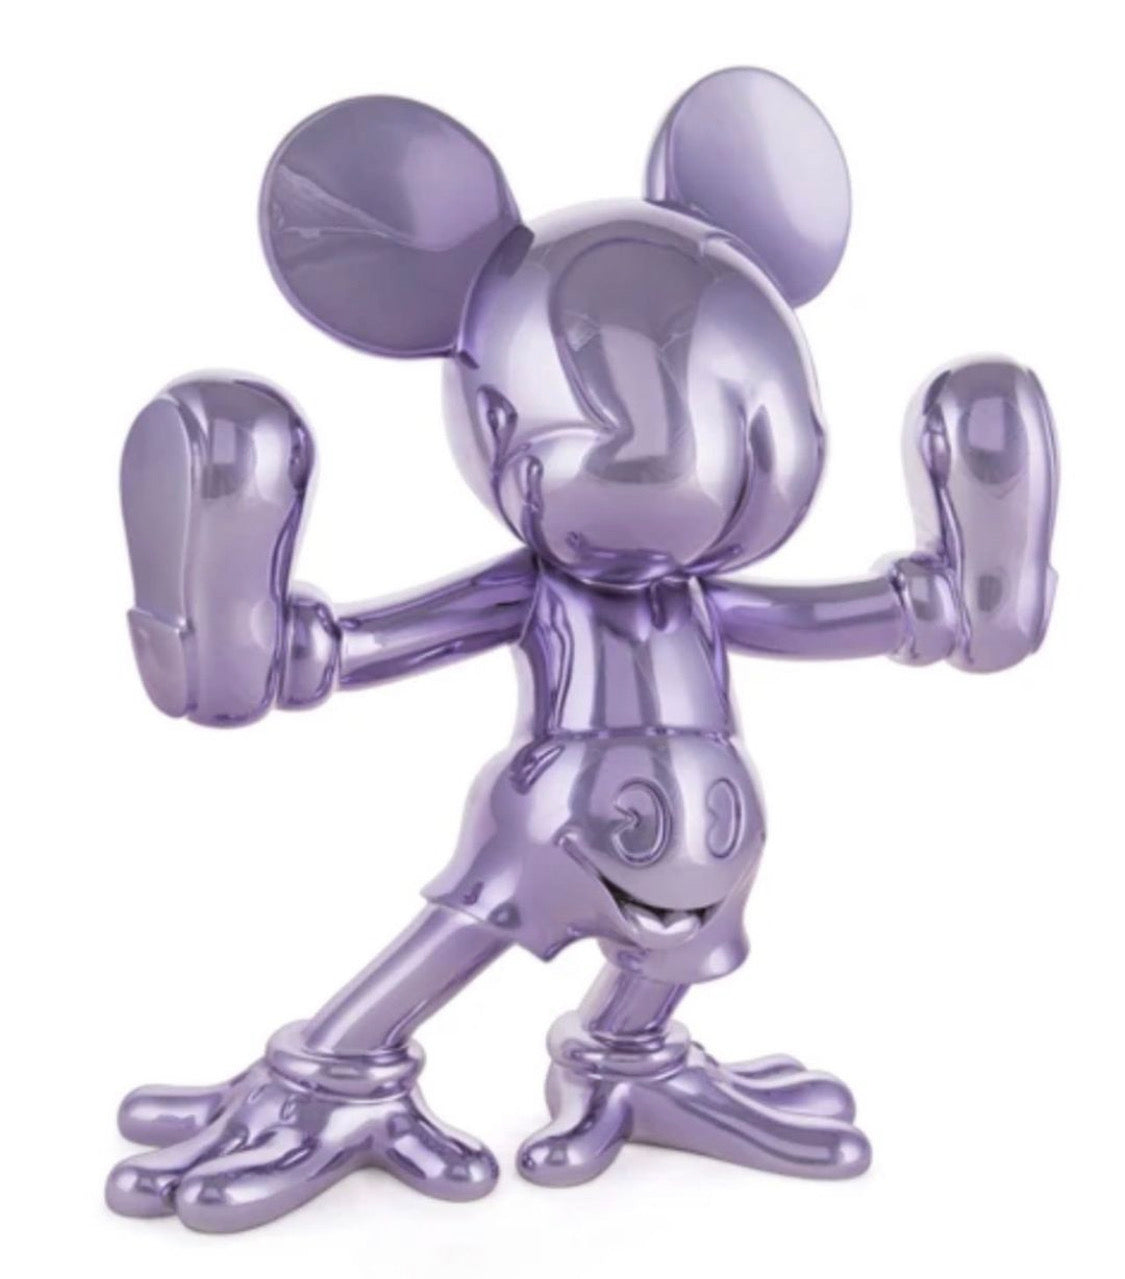 Freaky Mouse 4th Edition, 2017